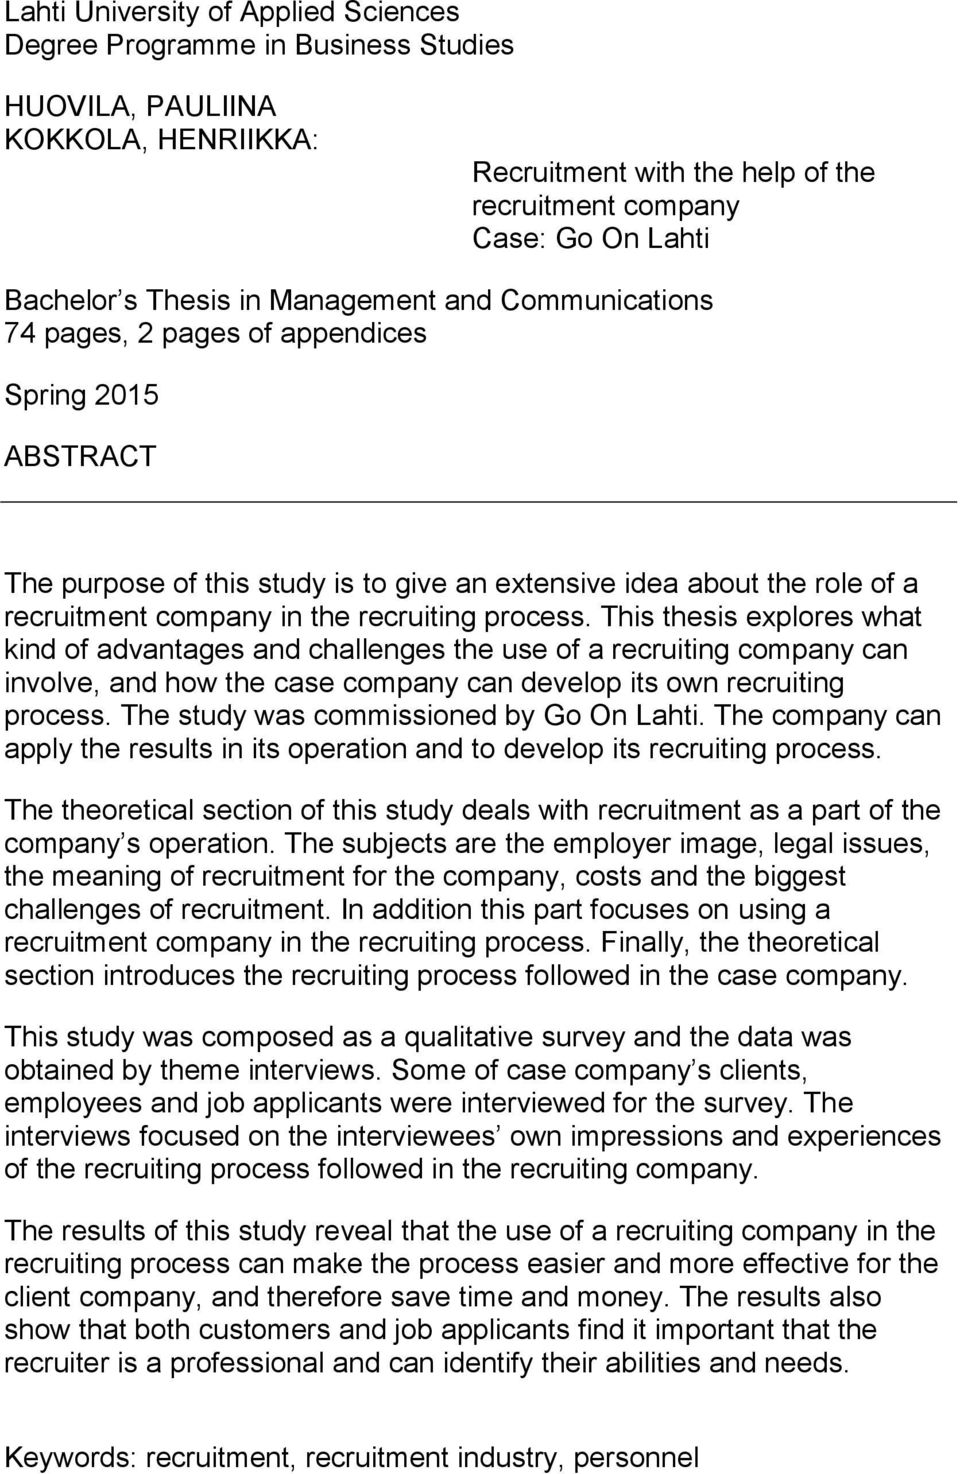 recruiting process. This thesis explores what kind of advantages and challenges the use of a recruiting company can involve, and how the case company can develop its own recruiting process.